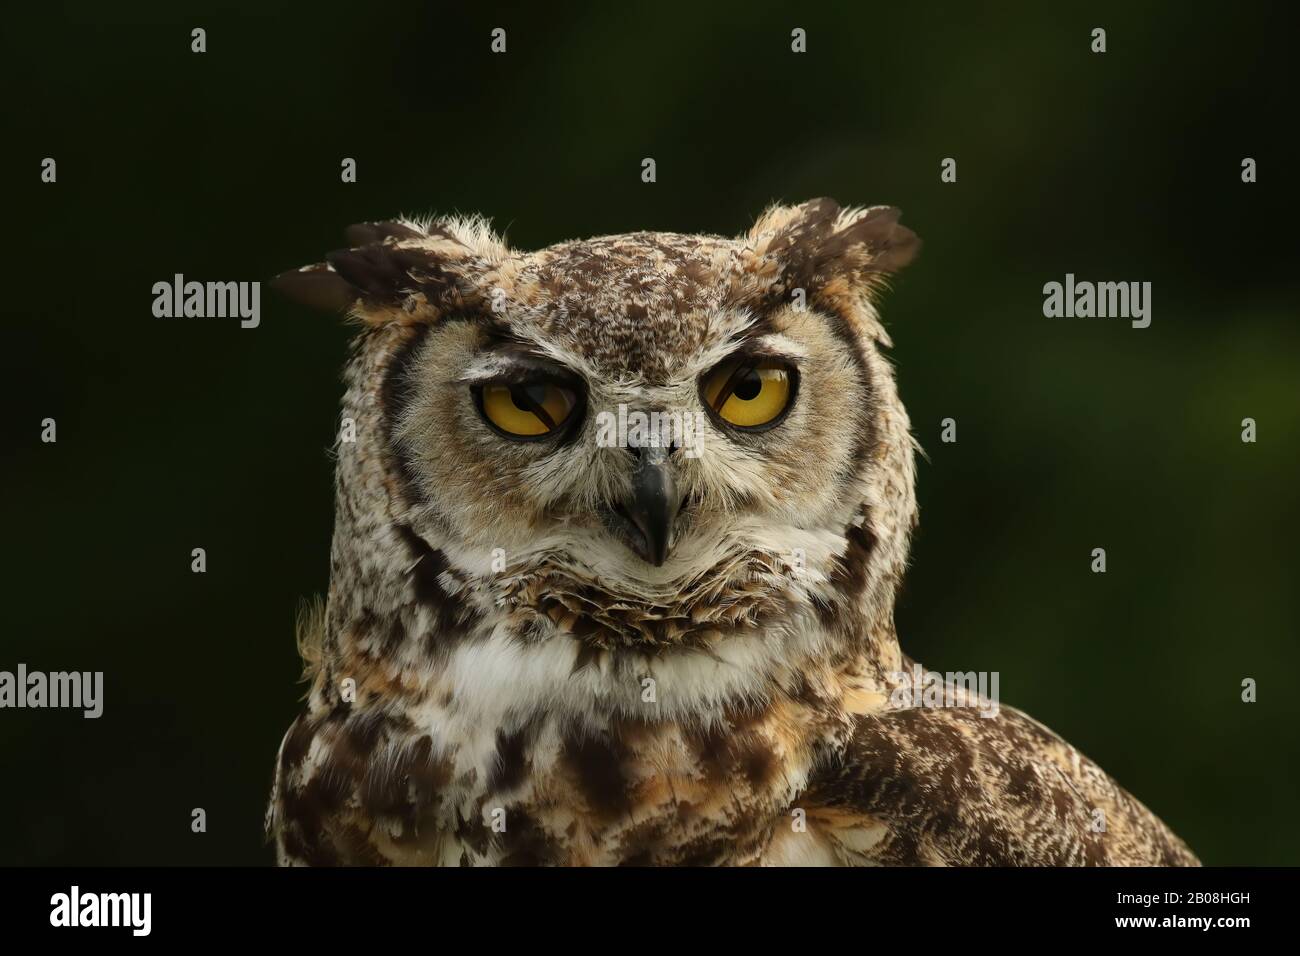 great horned owl close up Stock Photo